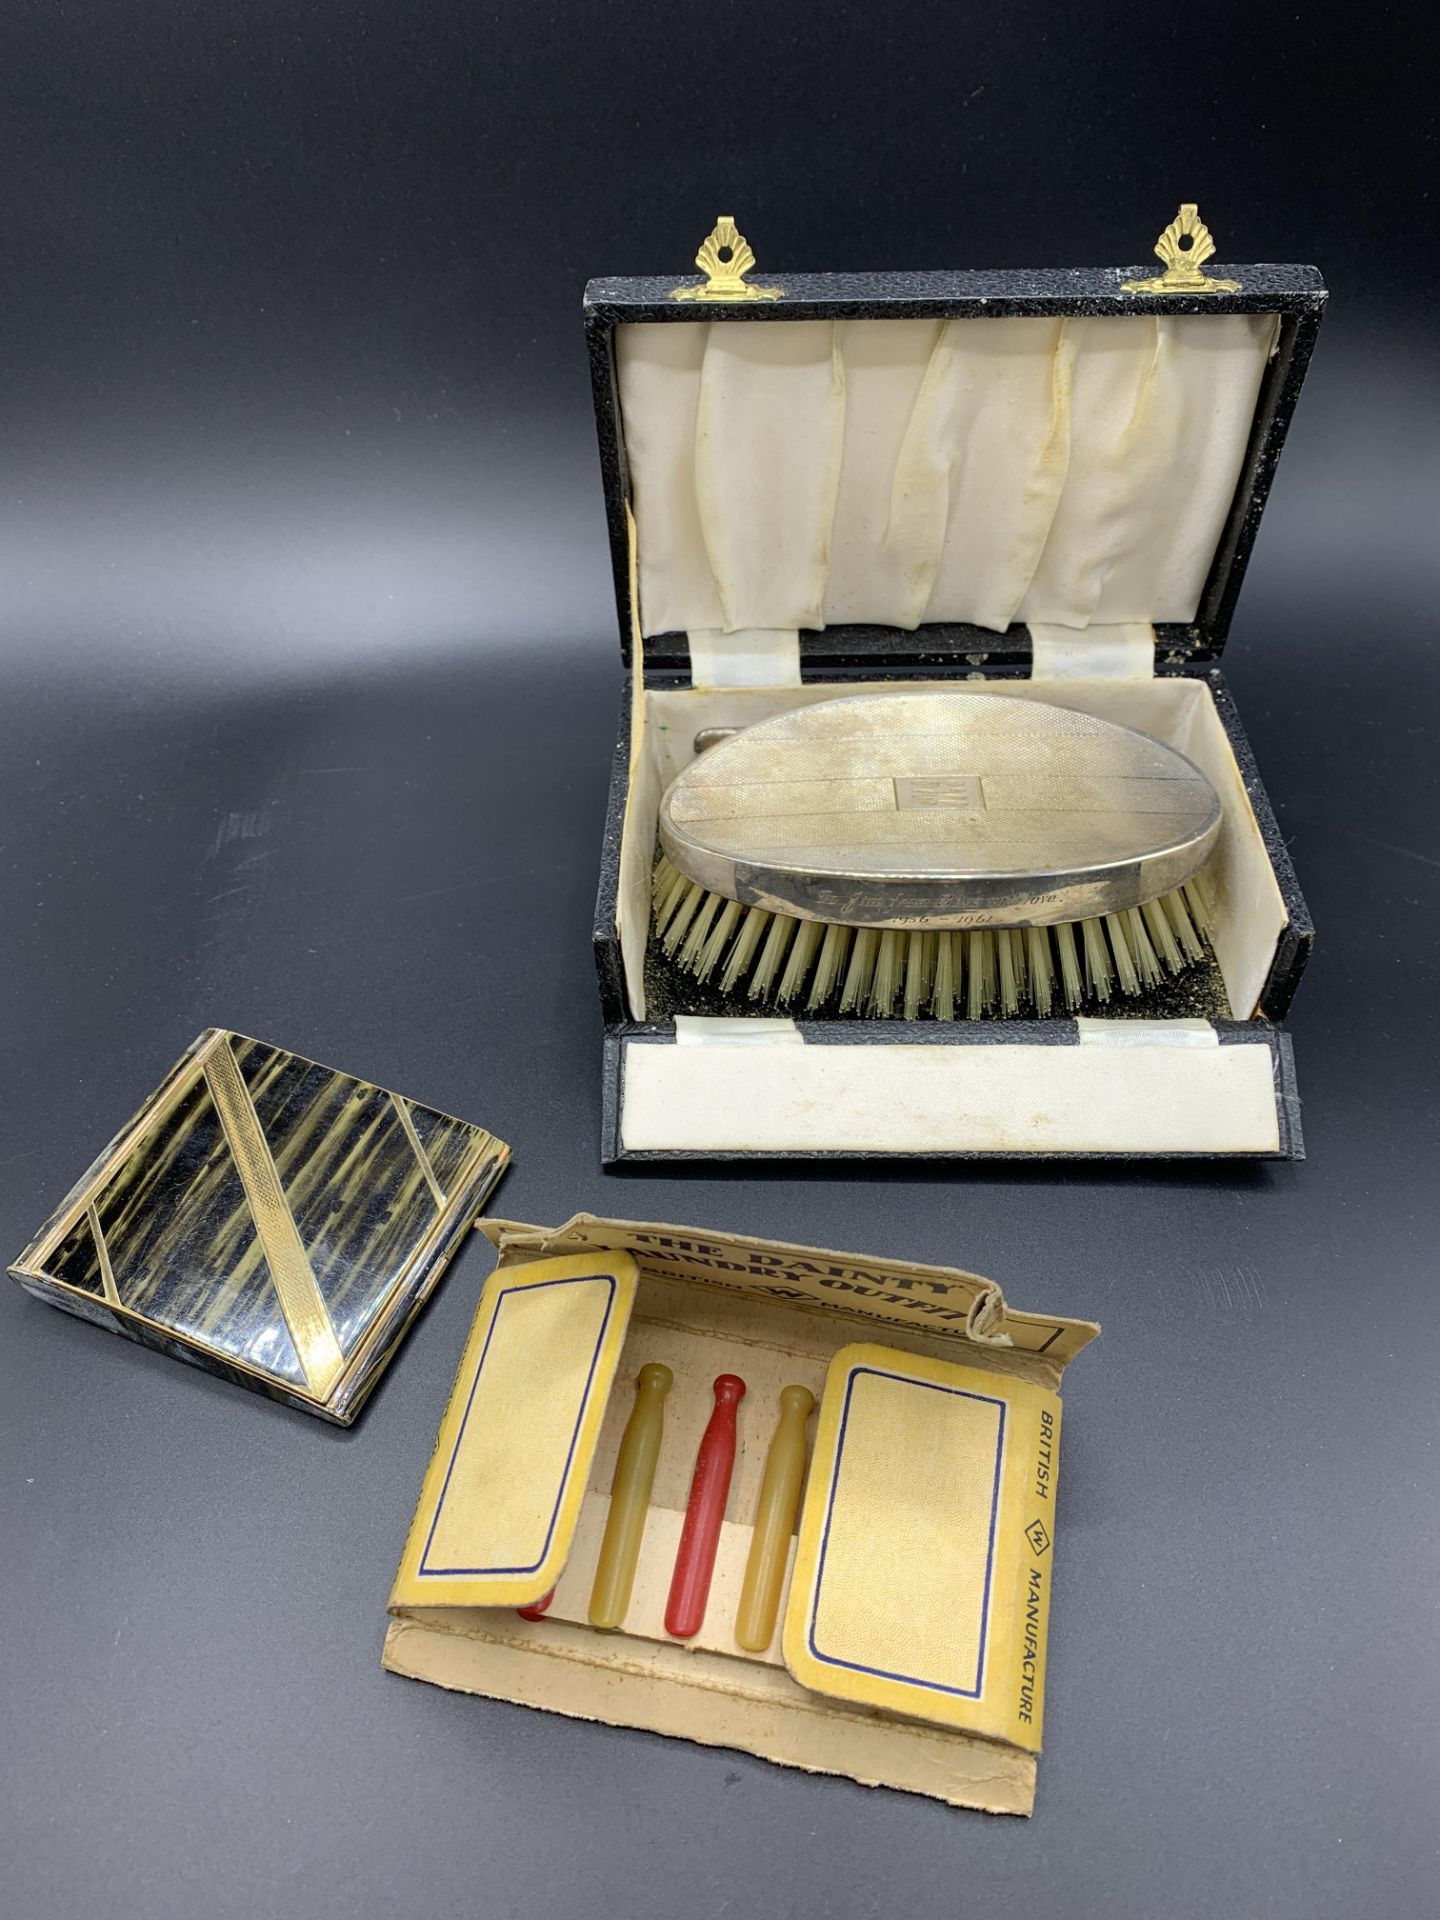 Hallmarked silver backed hairbrush and comb set and other items